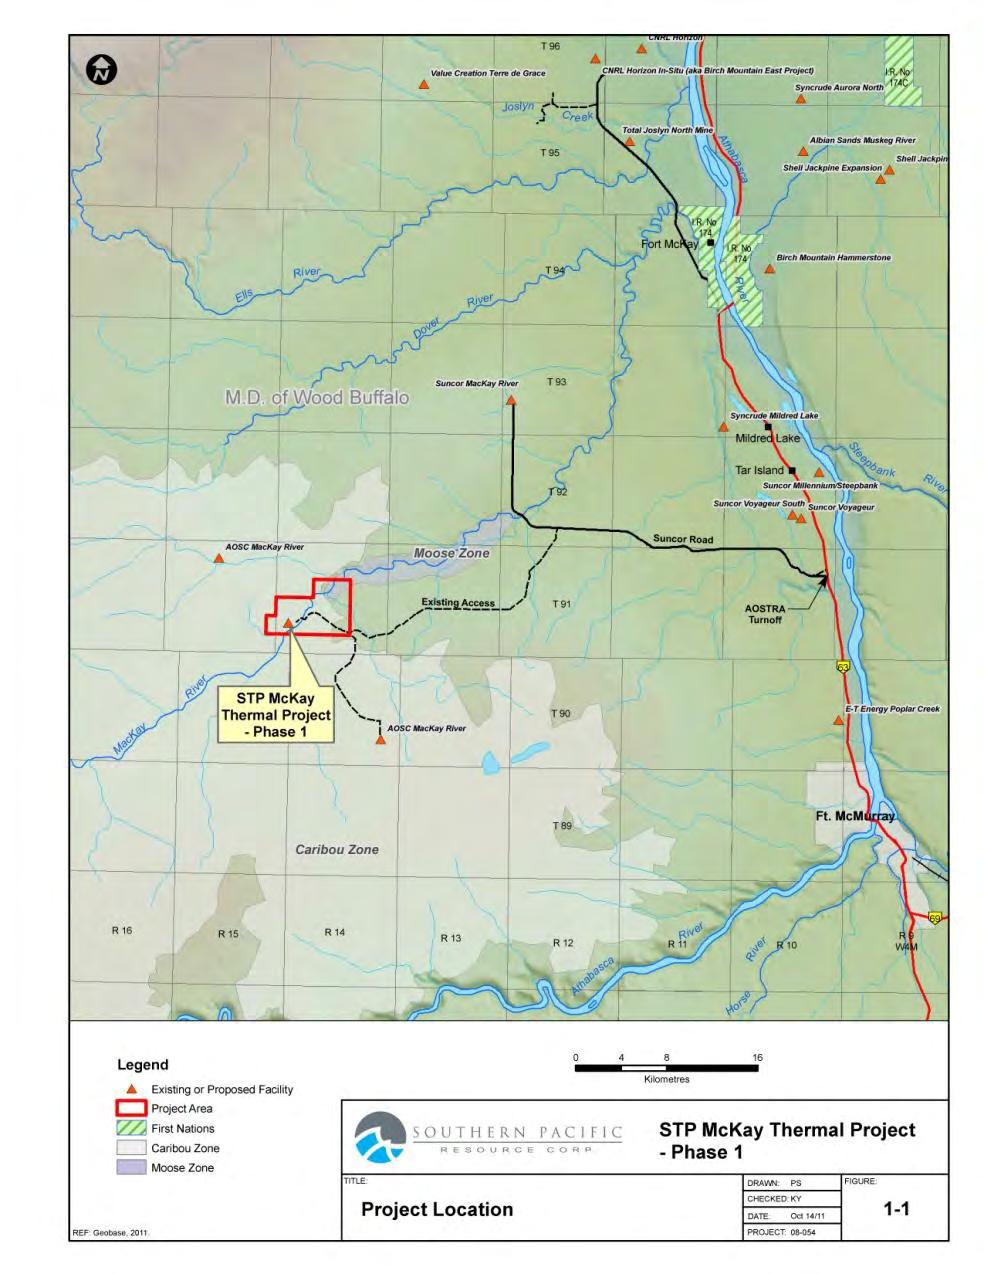 Project Background The Project is located approximately 45 km northwest of Fort McMurray and 45 km southwest of the community of Fort MacKay in Section